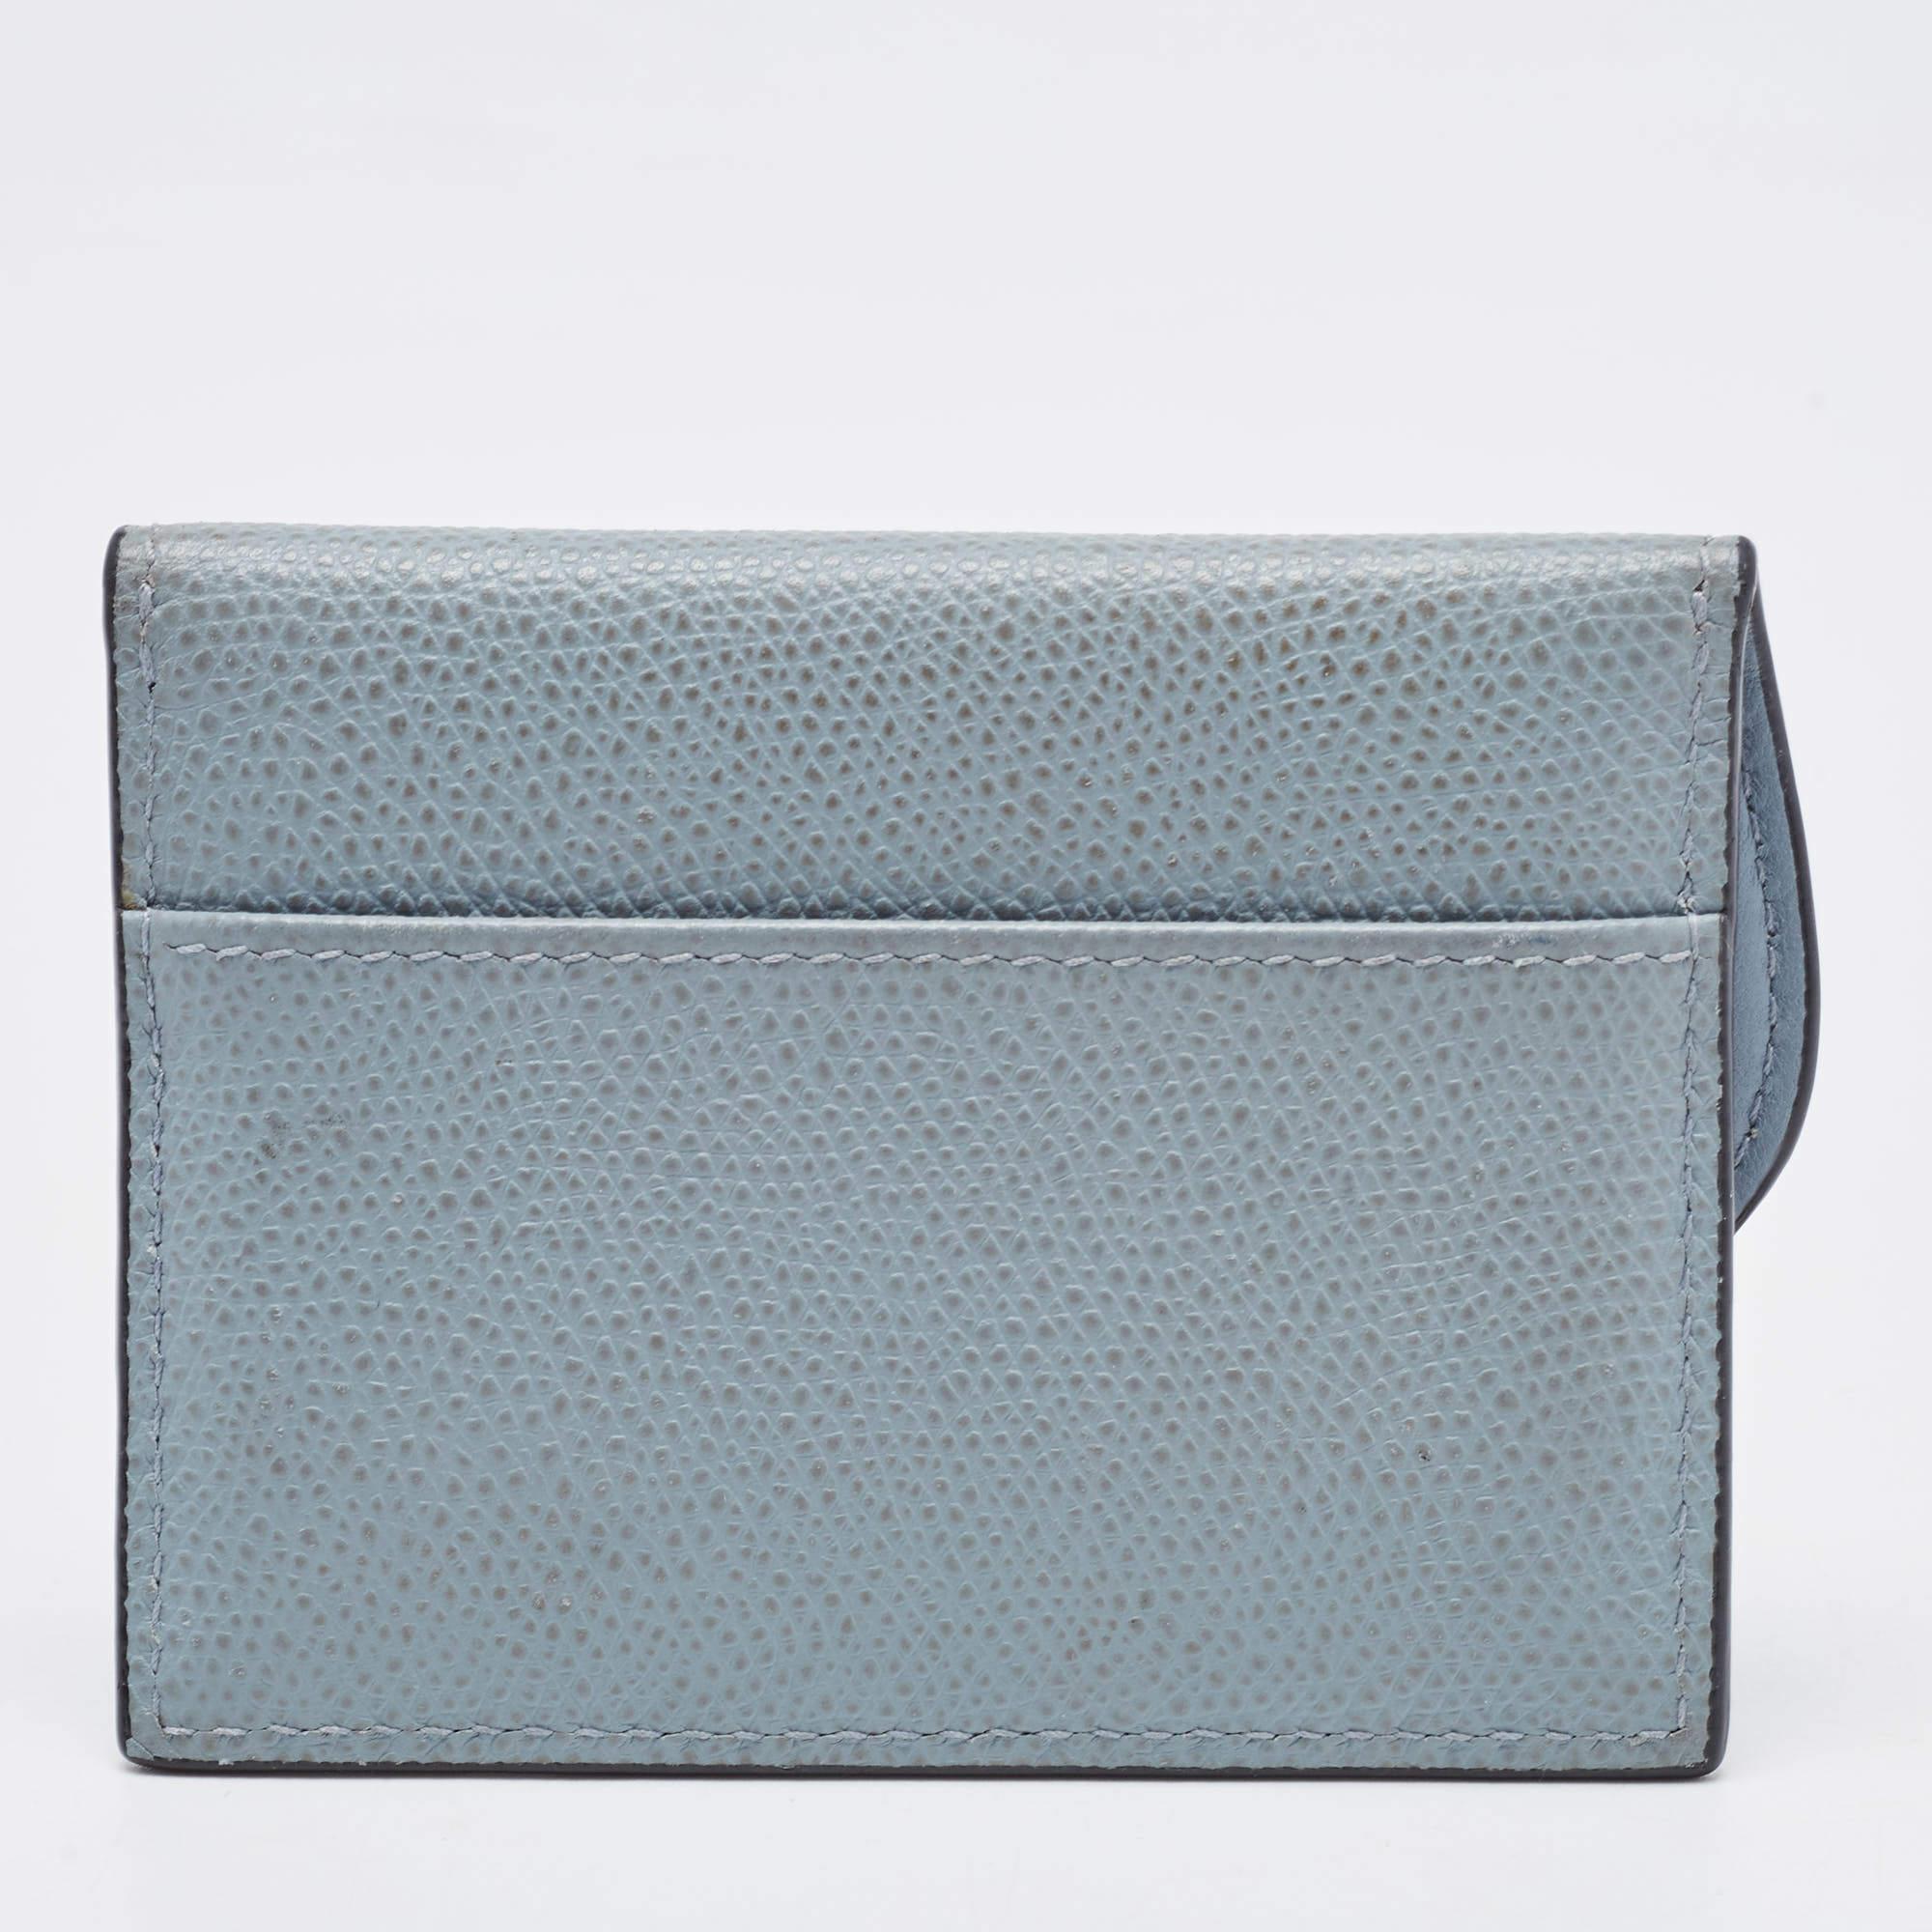 Crafted from leather in a light blue shade, the Dior card case comes with multiple compartments secured by a flap taken from the iconic Saddle bag. The creation is finished off with the D charm on the front.

Includes: Original Dustbag

